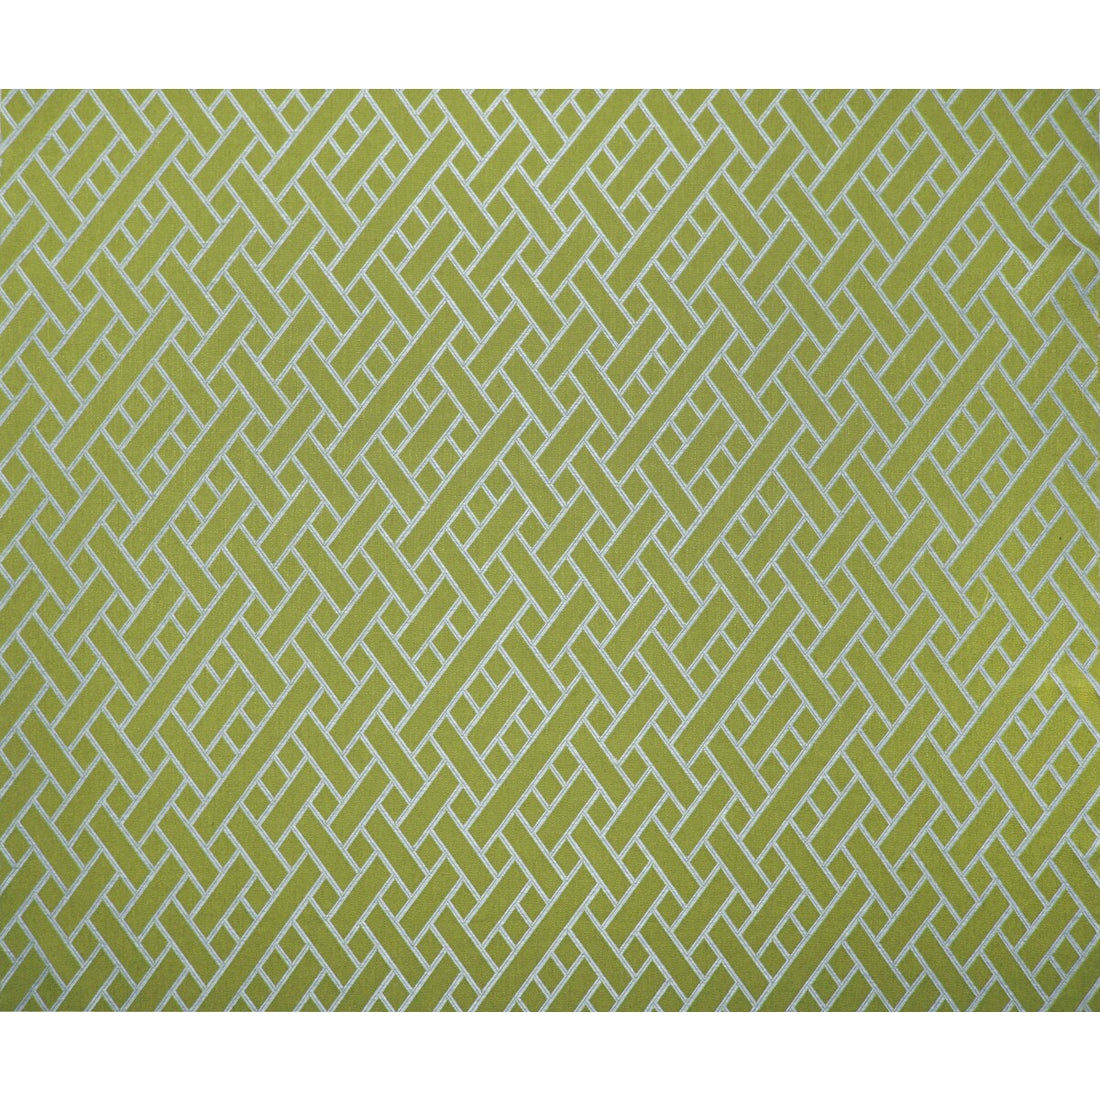 Nairobi fabric in verde color - pattern GDT5374.4.0 - by Gaston y Daniela in the Gaston Africalia collection